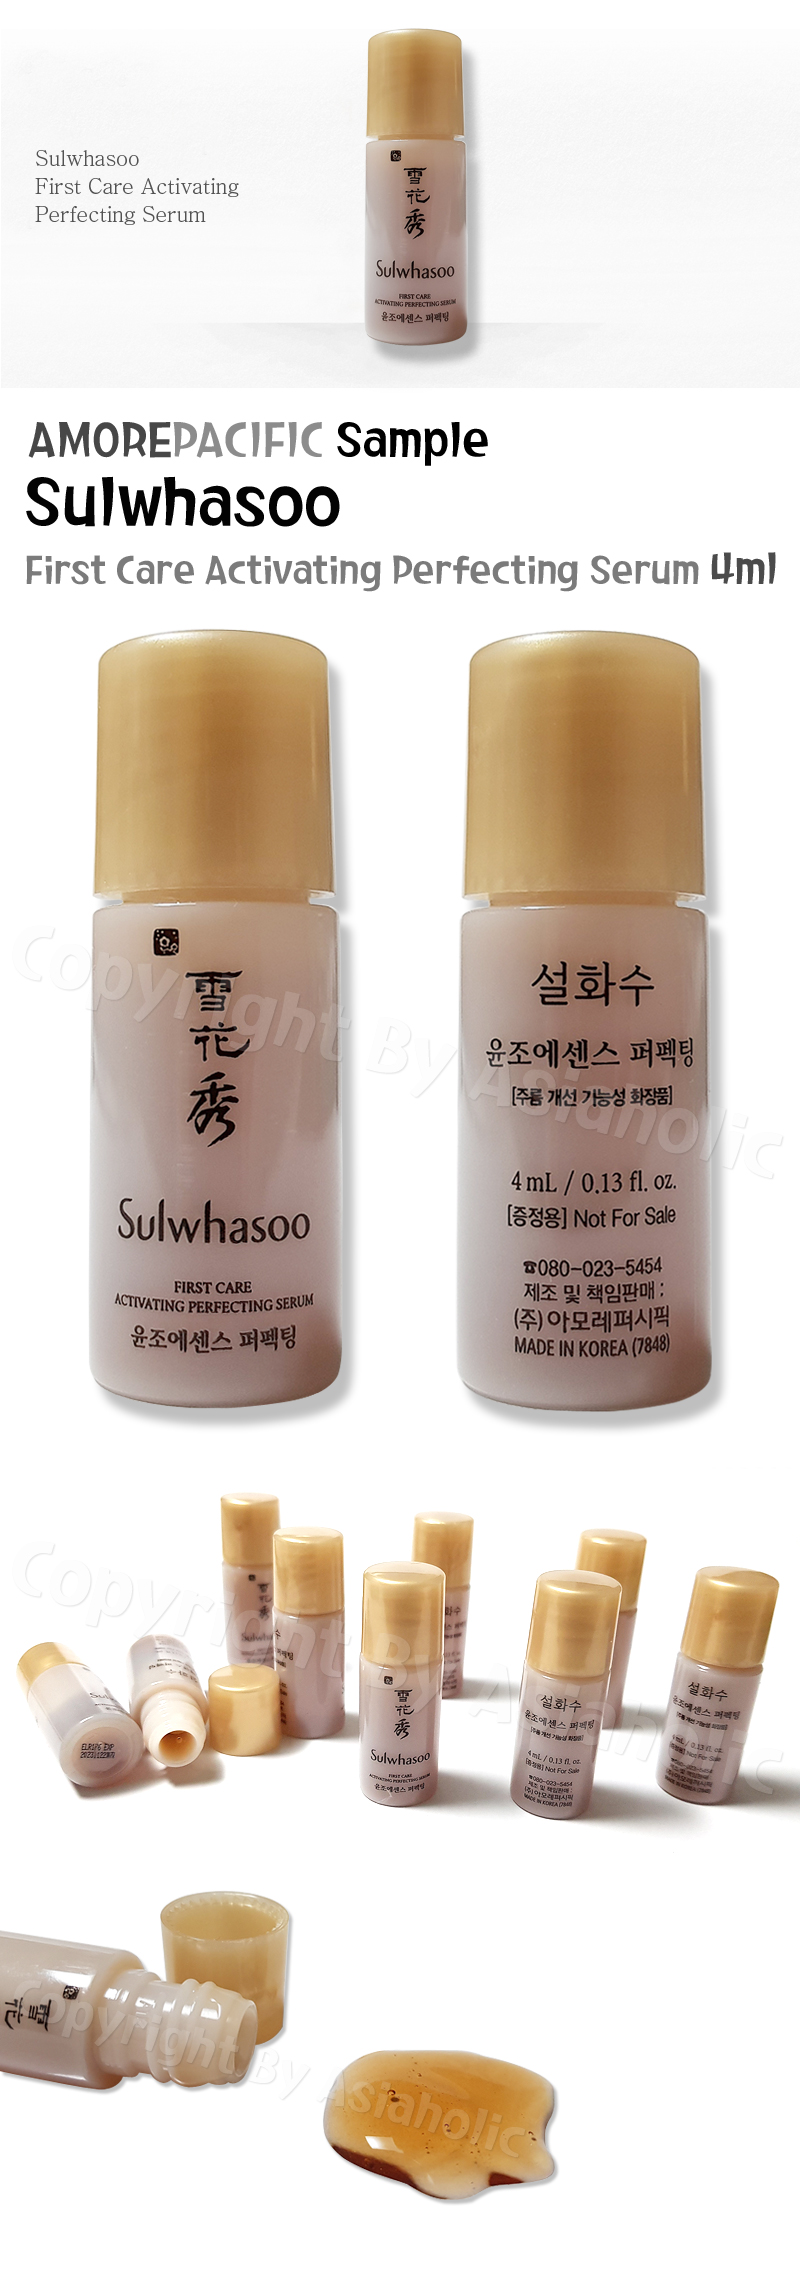 Sulwhasoo First Care Activating Perfecting Serum 4ml x 30pcs (120ml) Sample Newest Version